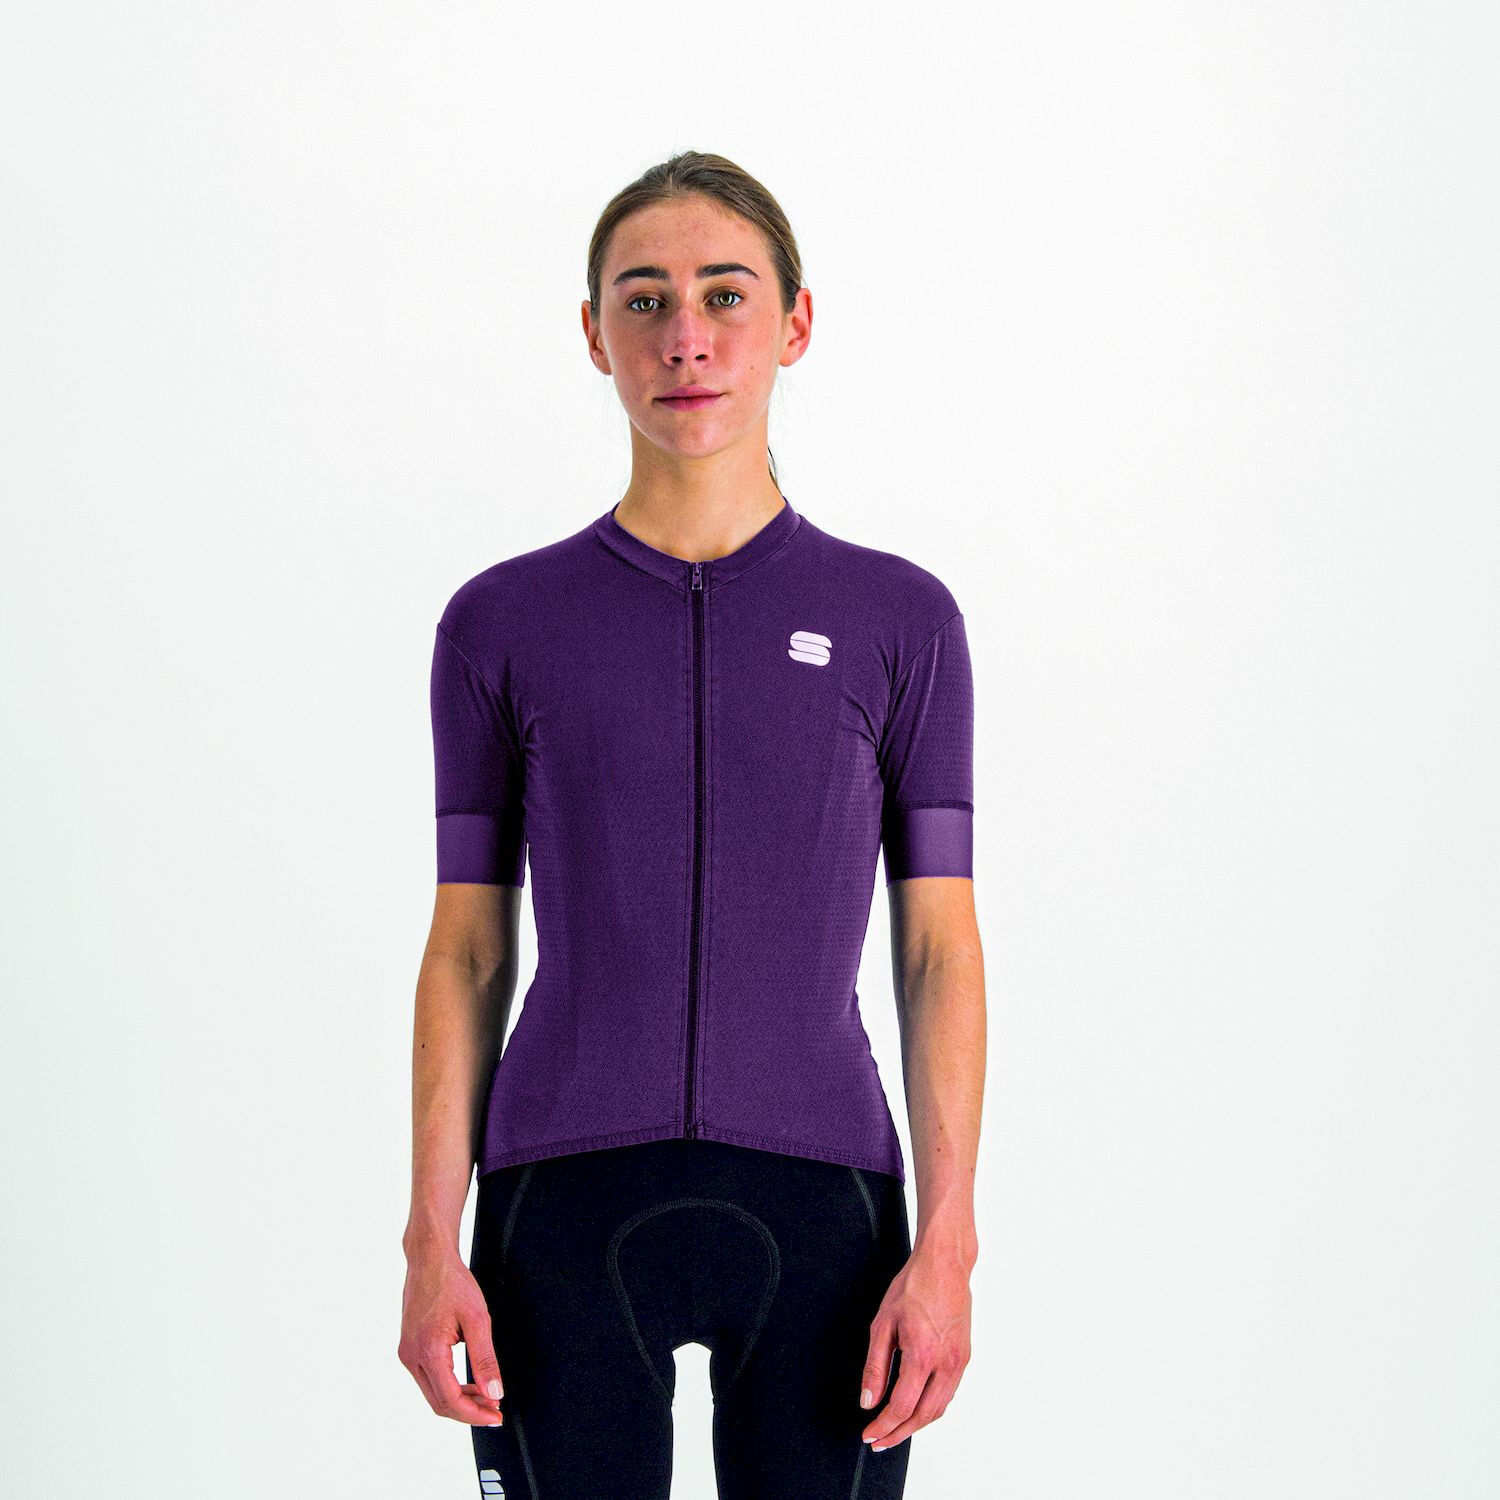 Sportful Monocrom - Maillot ciclismo - Mujer